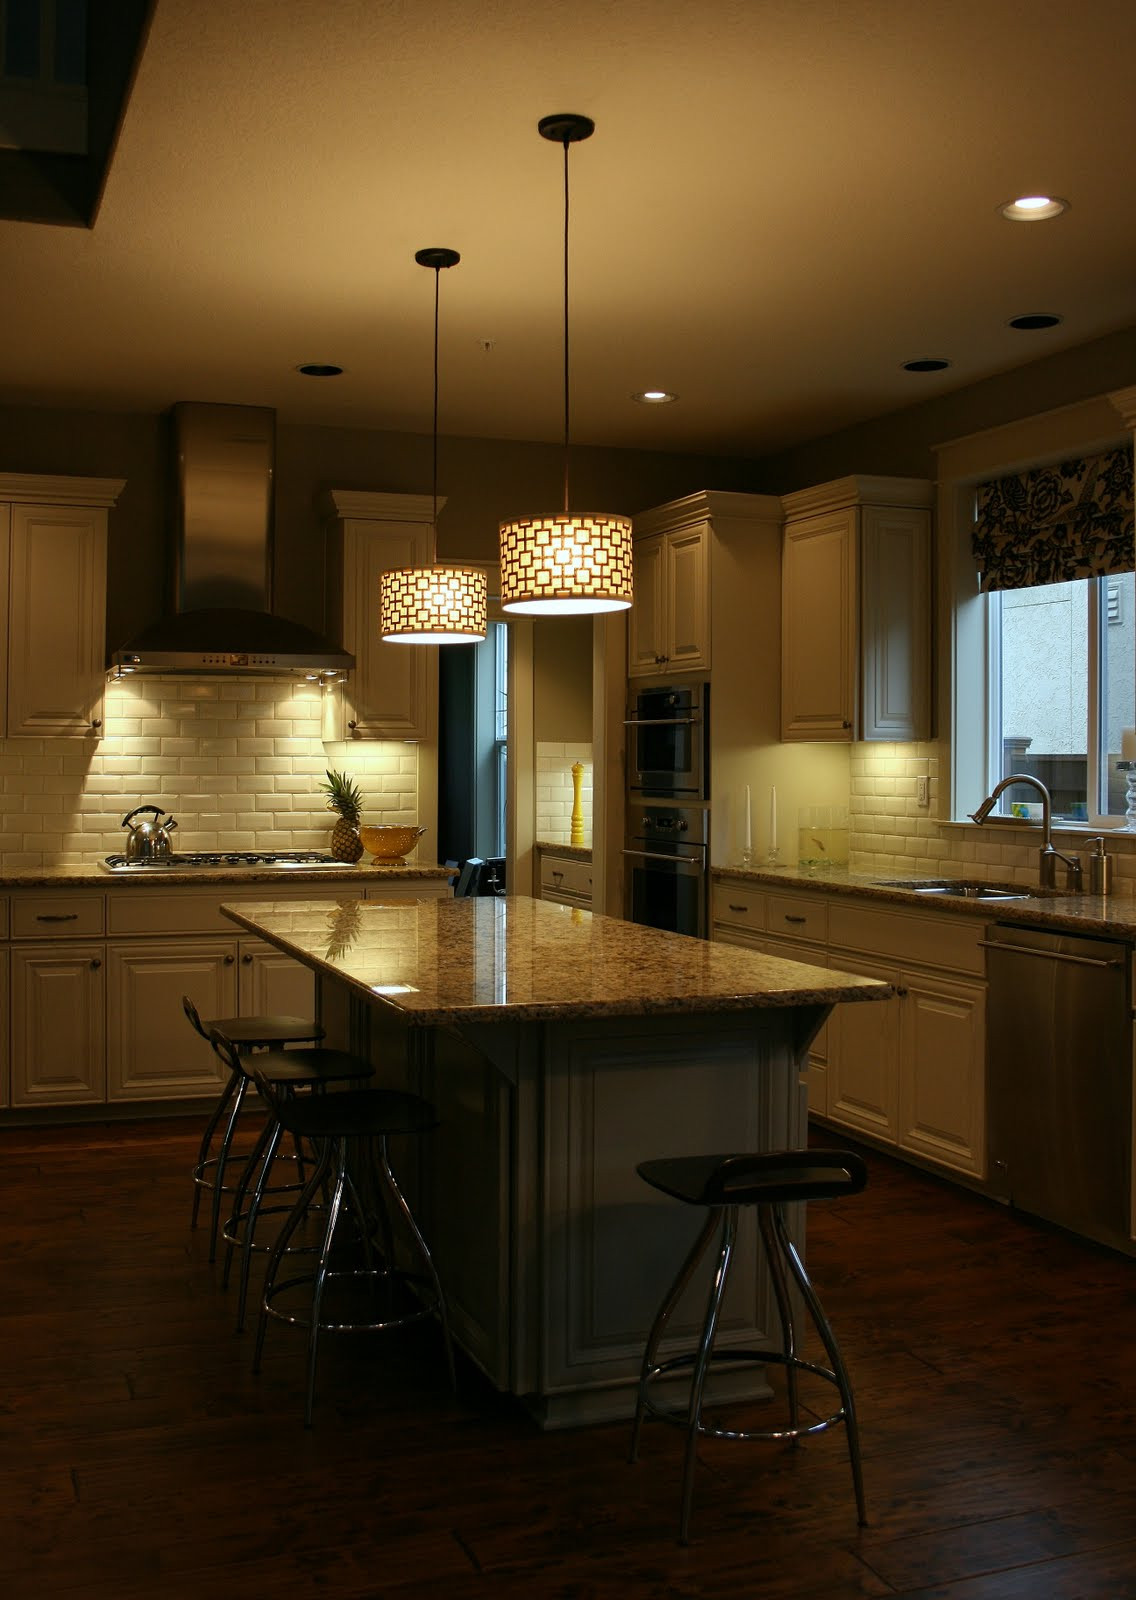 Lighting Fixtures For Kitchen Islands
 Kitchen Island Lighting System with Pendant and Chandelier